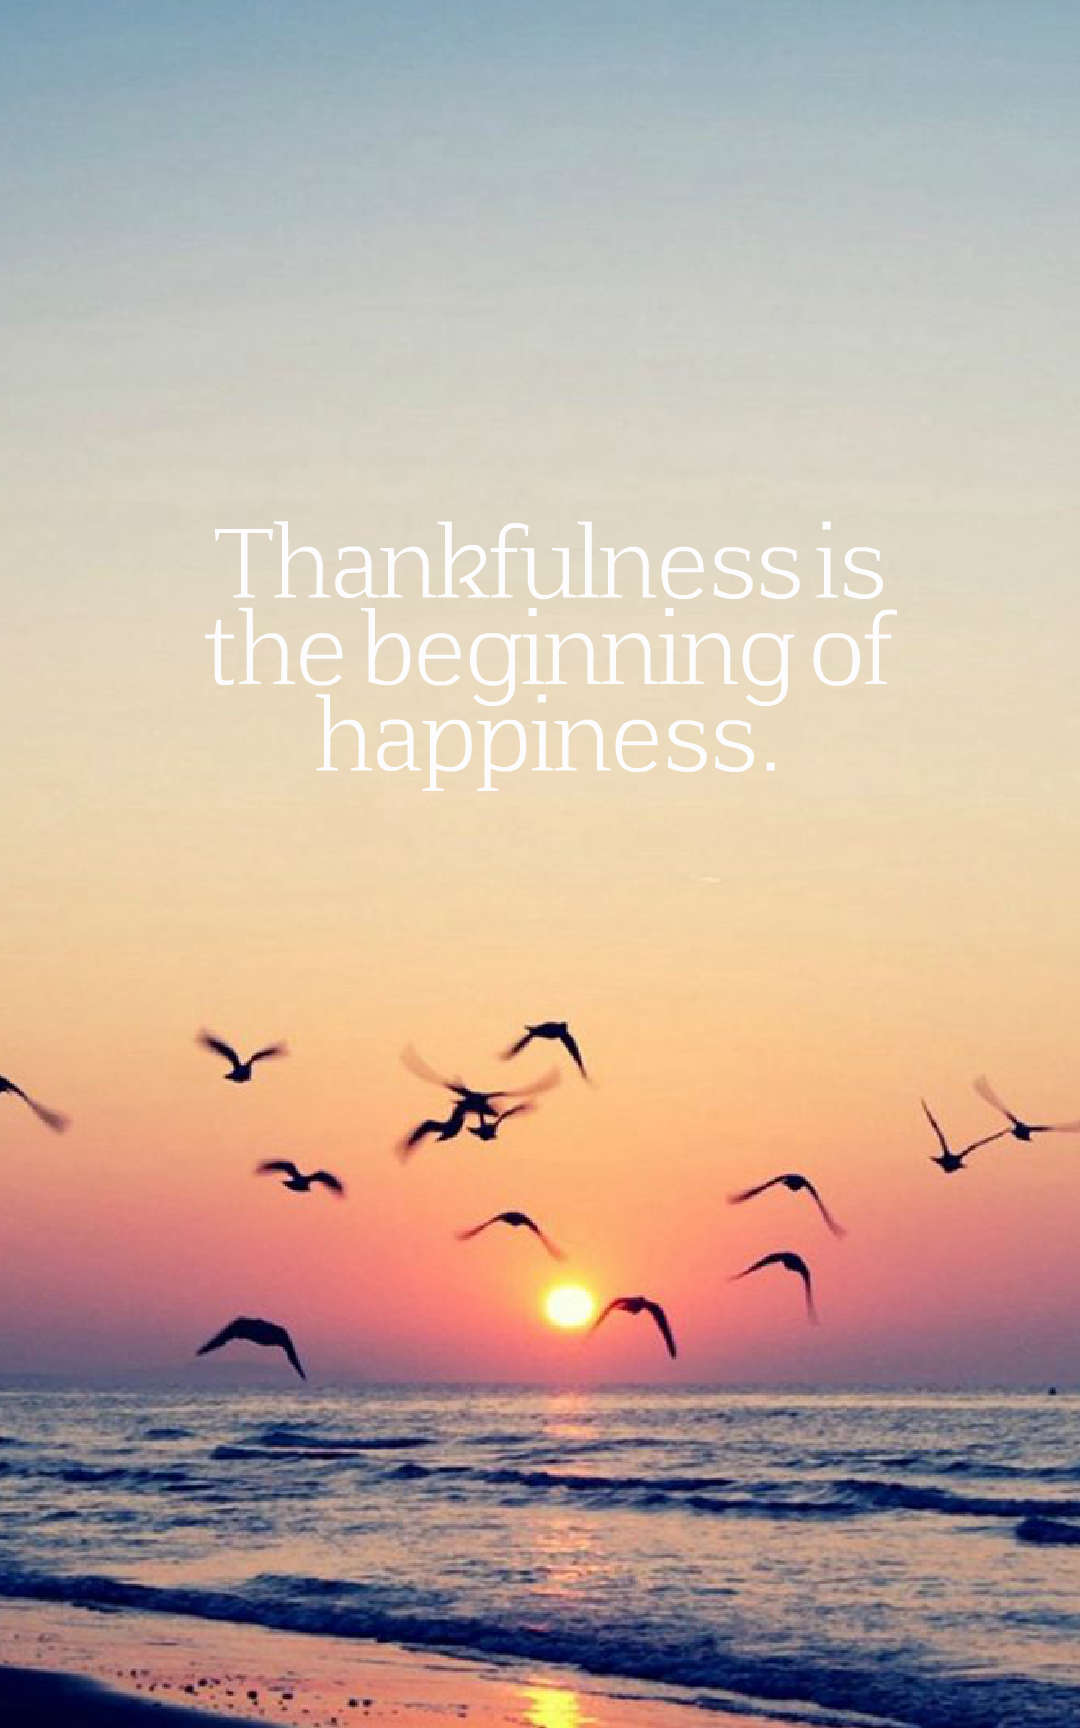 Thankfulness is the beginning of happiness.